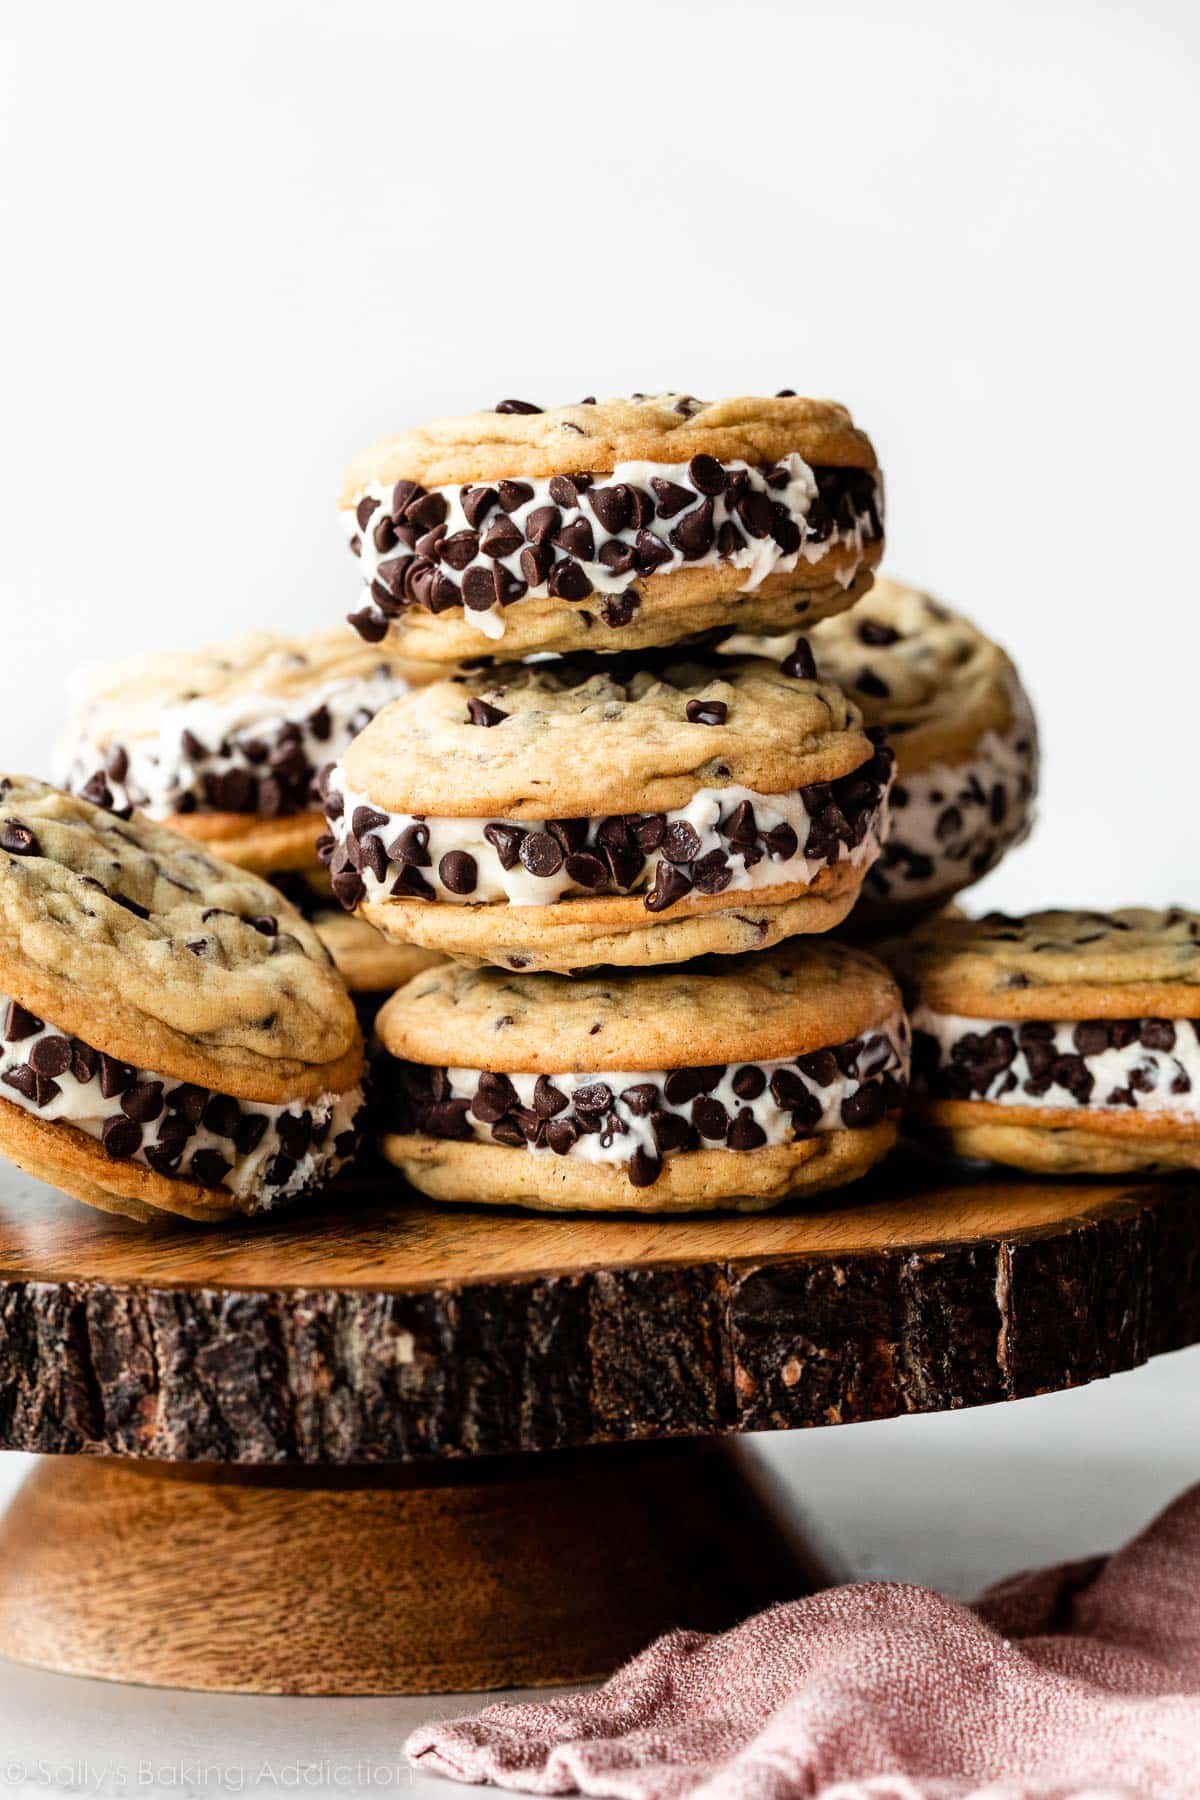 Cookie Ice Cream Sandwiches Like A Chipwich   Sally's Baking ...